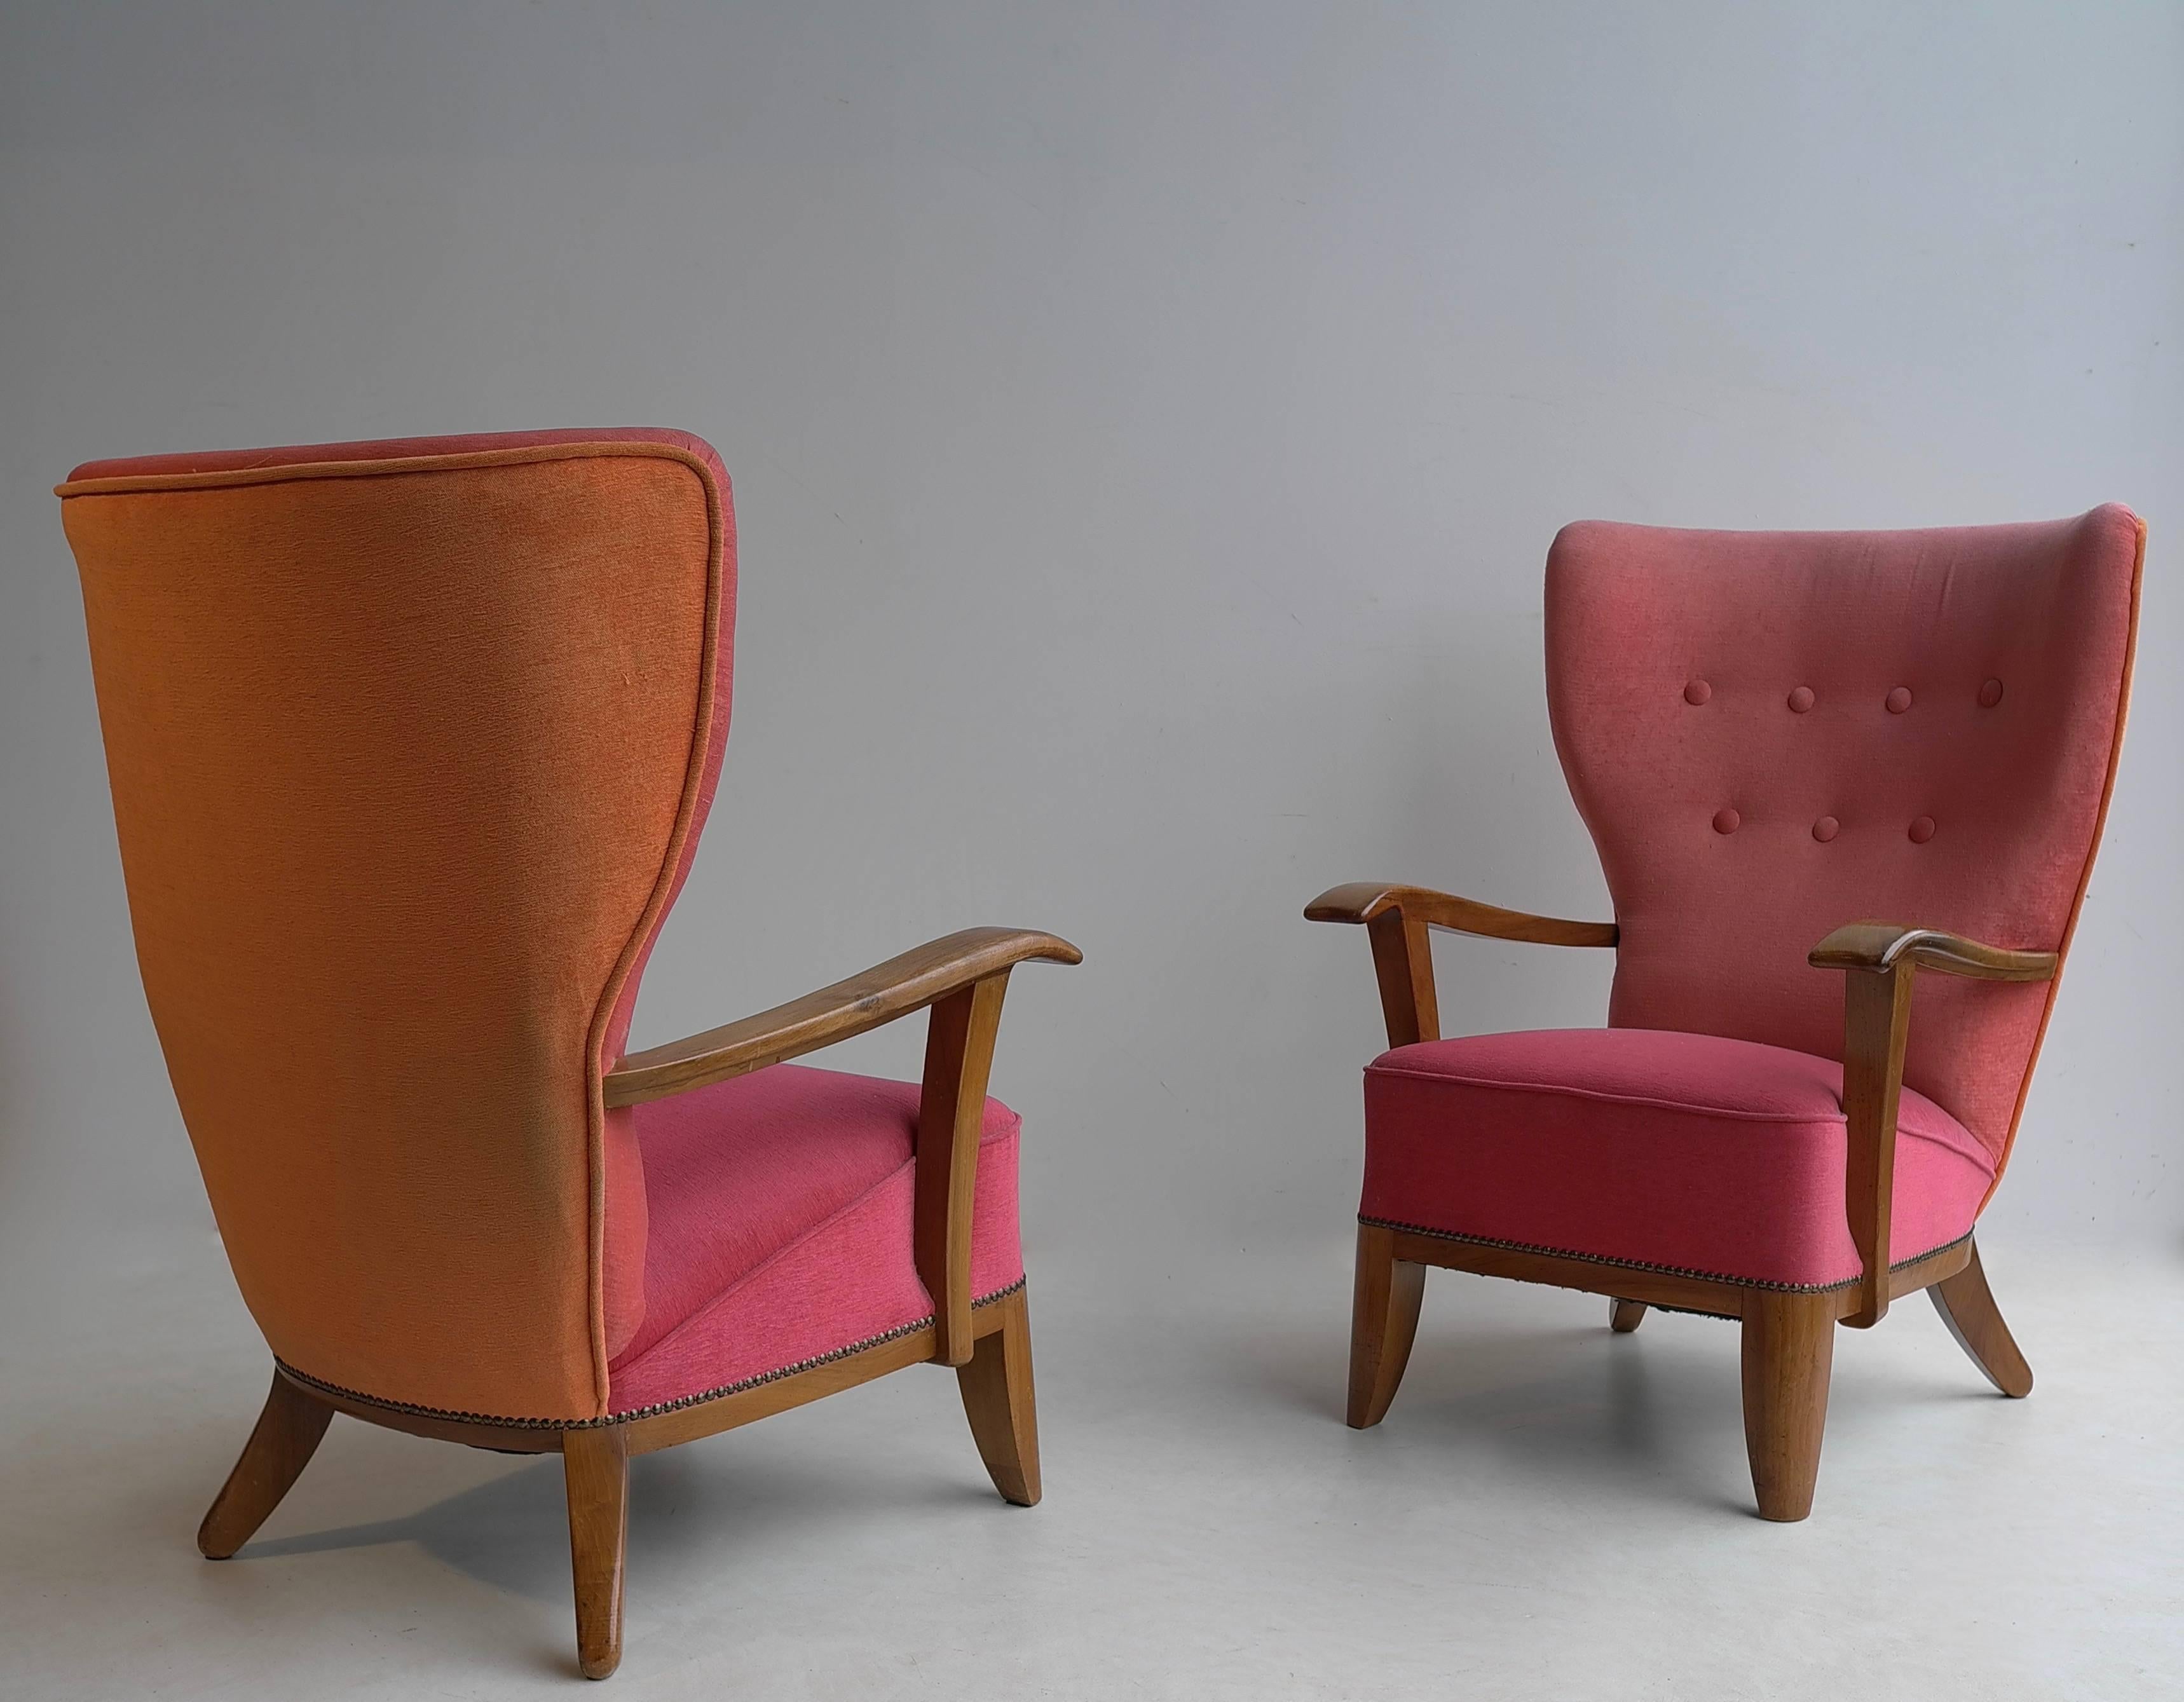 Pair of three-tone Wingback armchairs, France 1940s.
